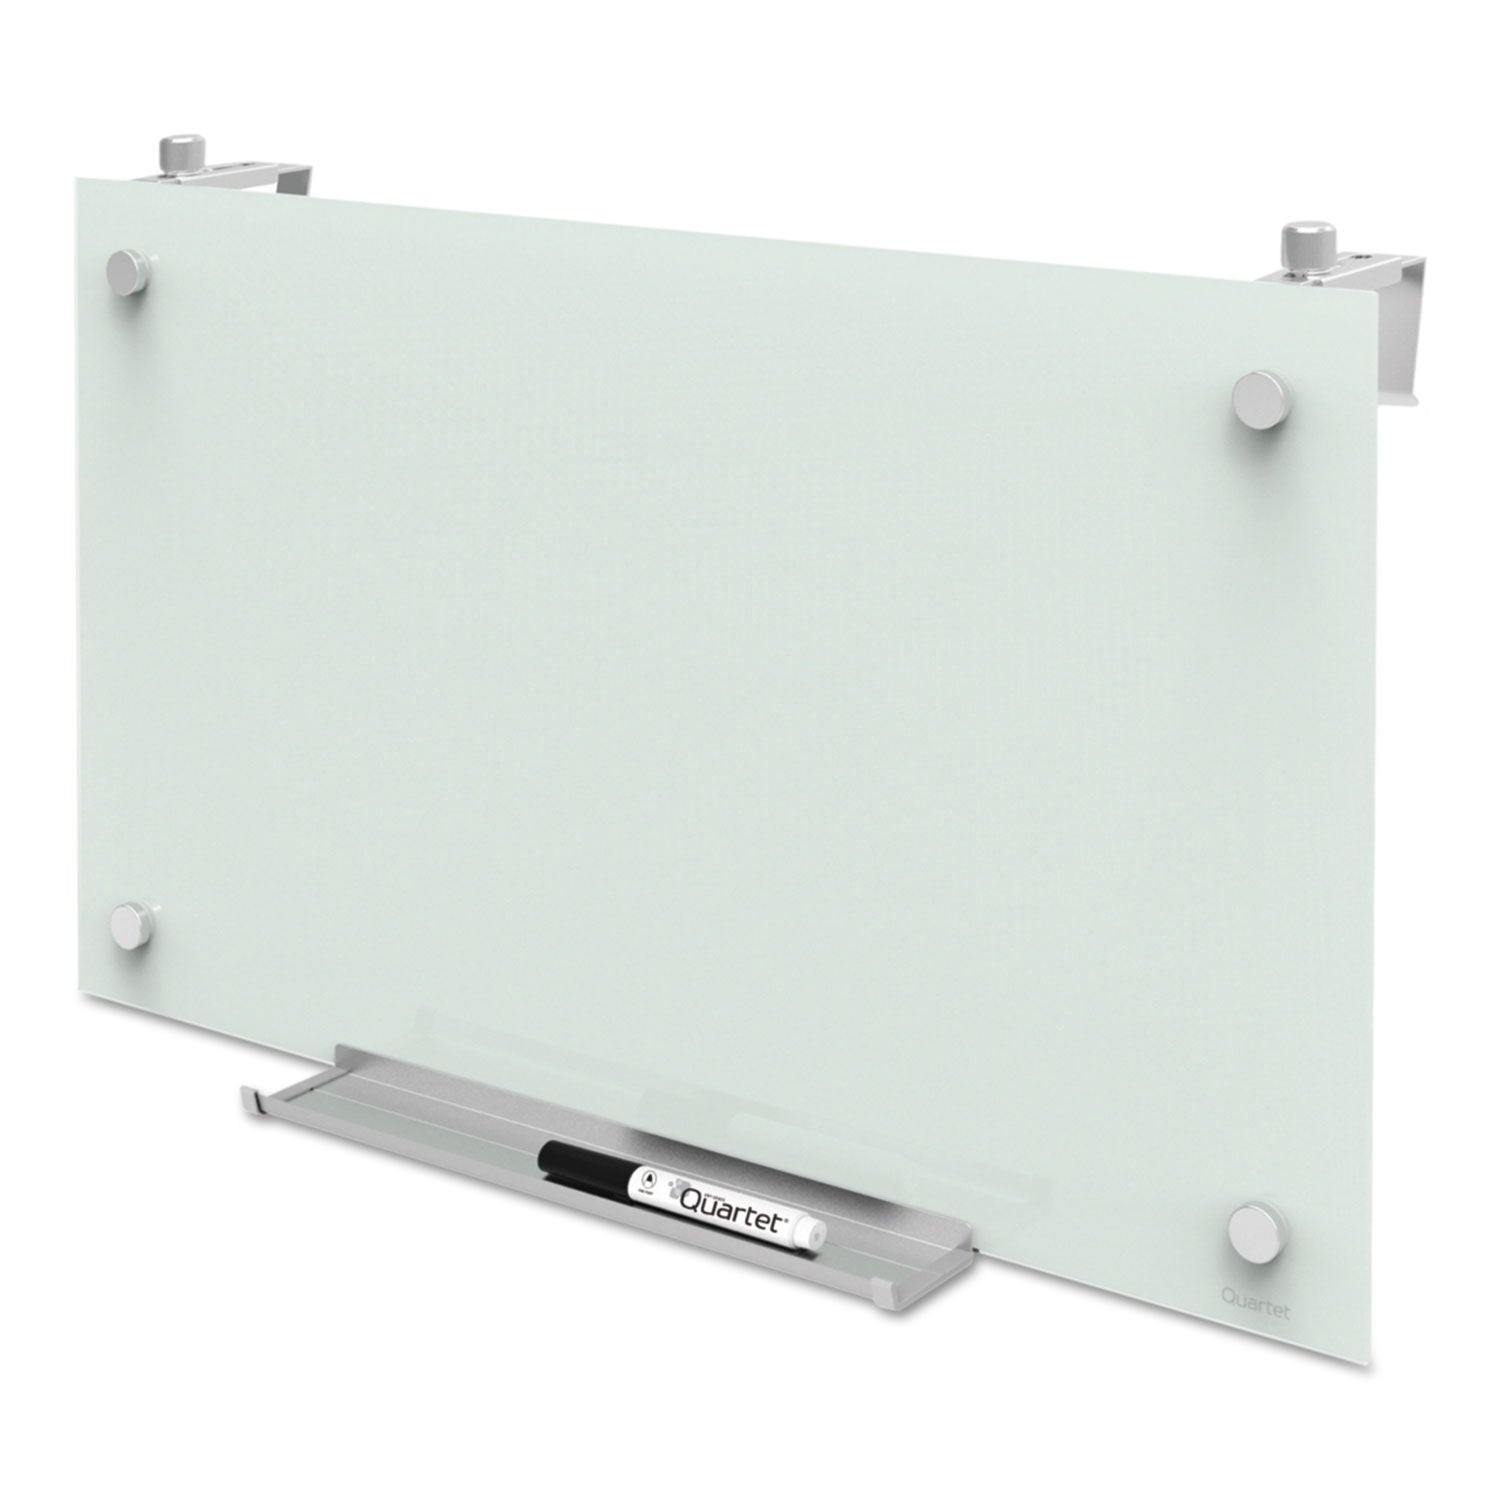 infinity-magnetic-glass-dry-erase-cubicle-board-30-x-18-white-surface_qrtpdec1830 - 4